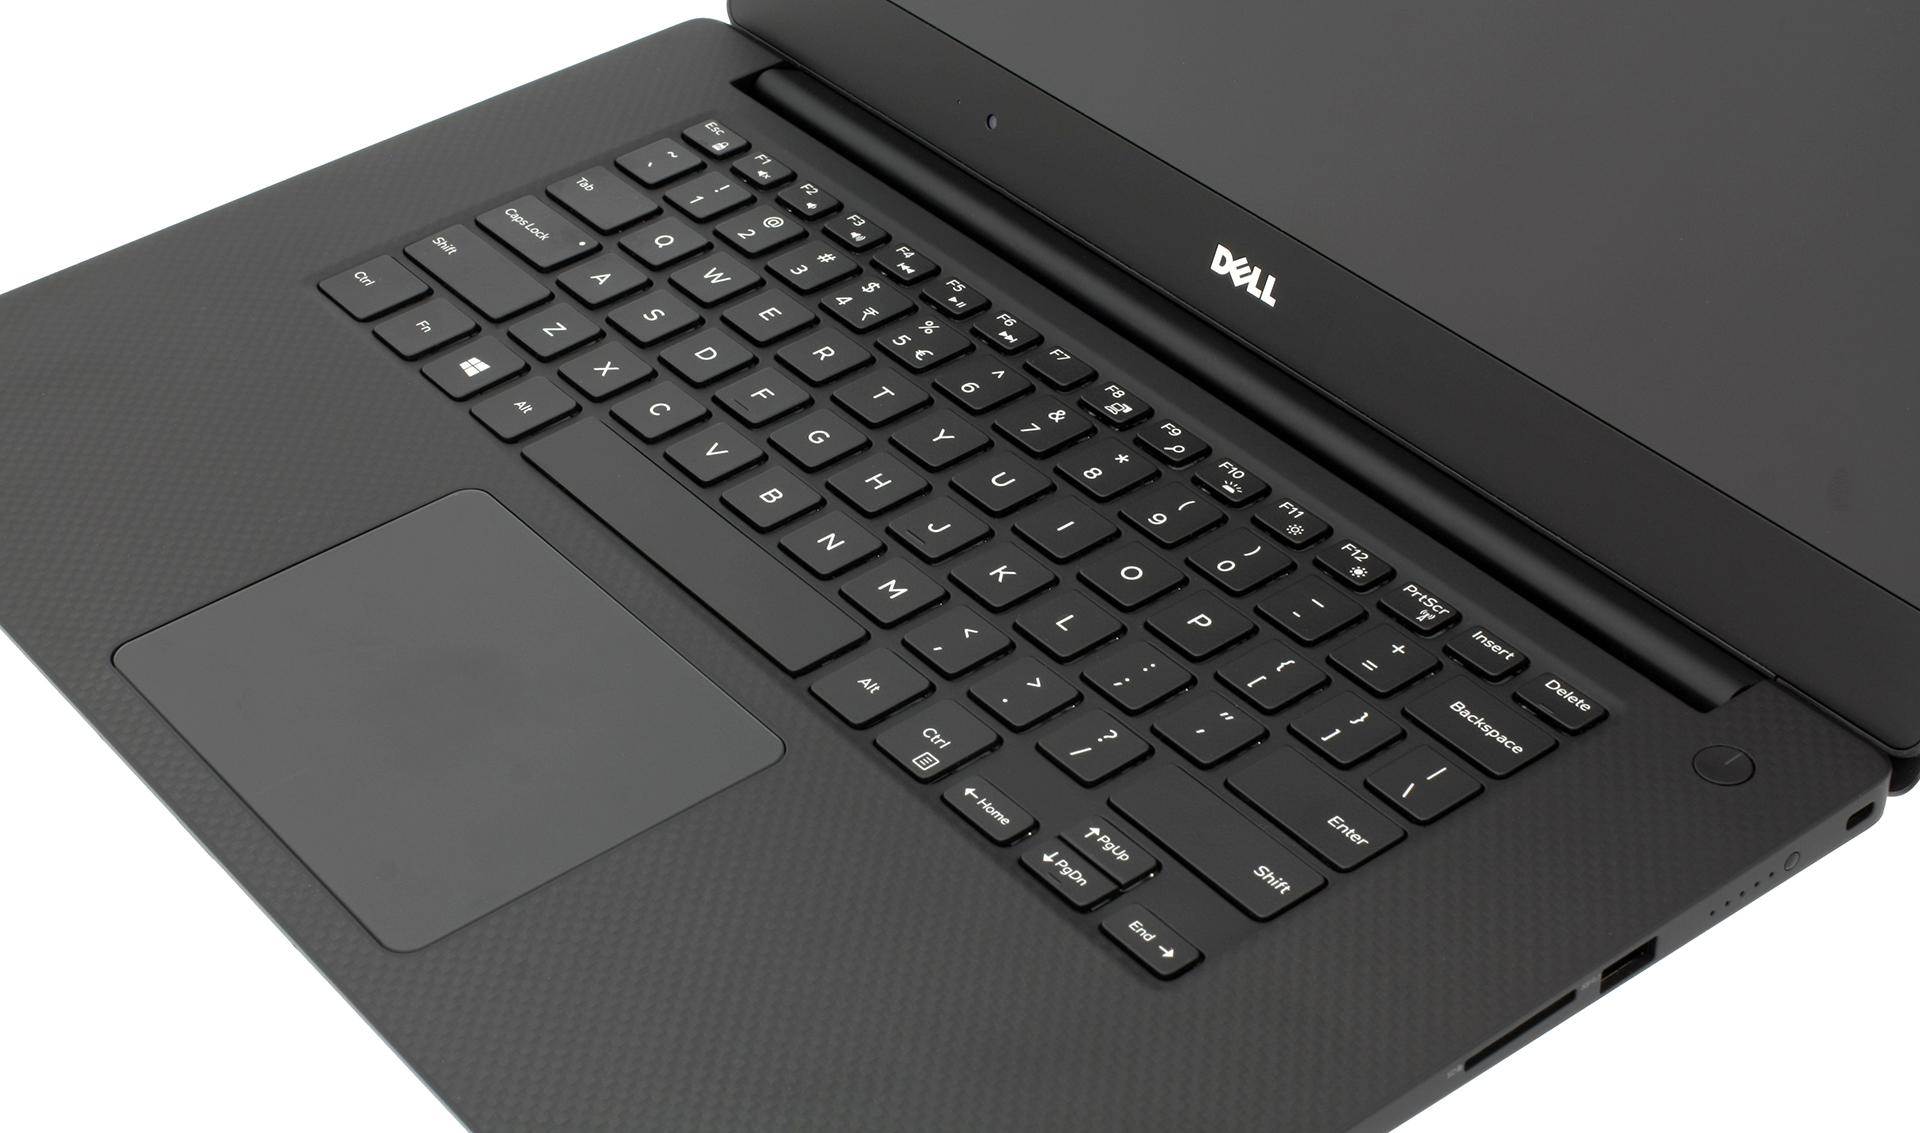 dell xps 15 9560 review